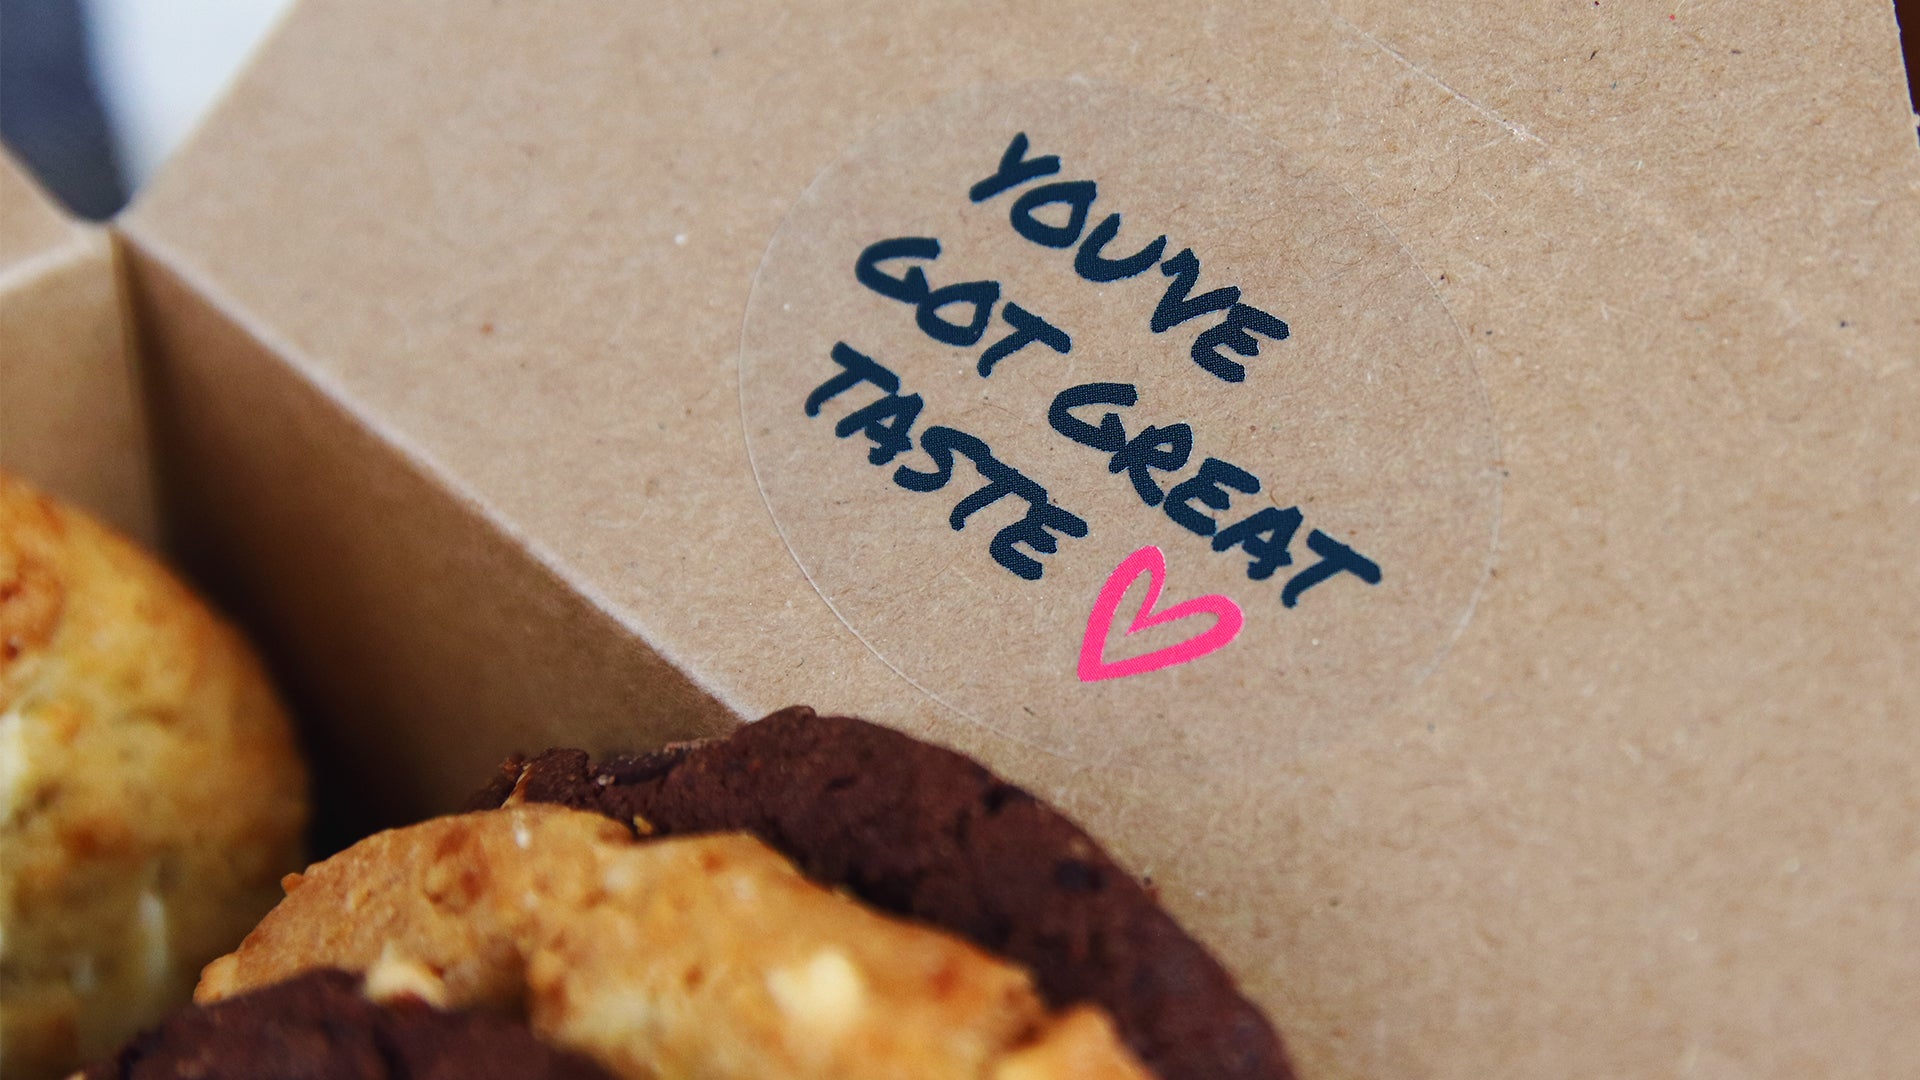 Oval clear label applied to a cardboard box filled with cookies stating you've got great taste